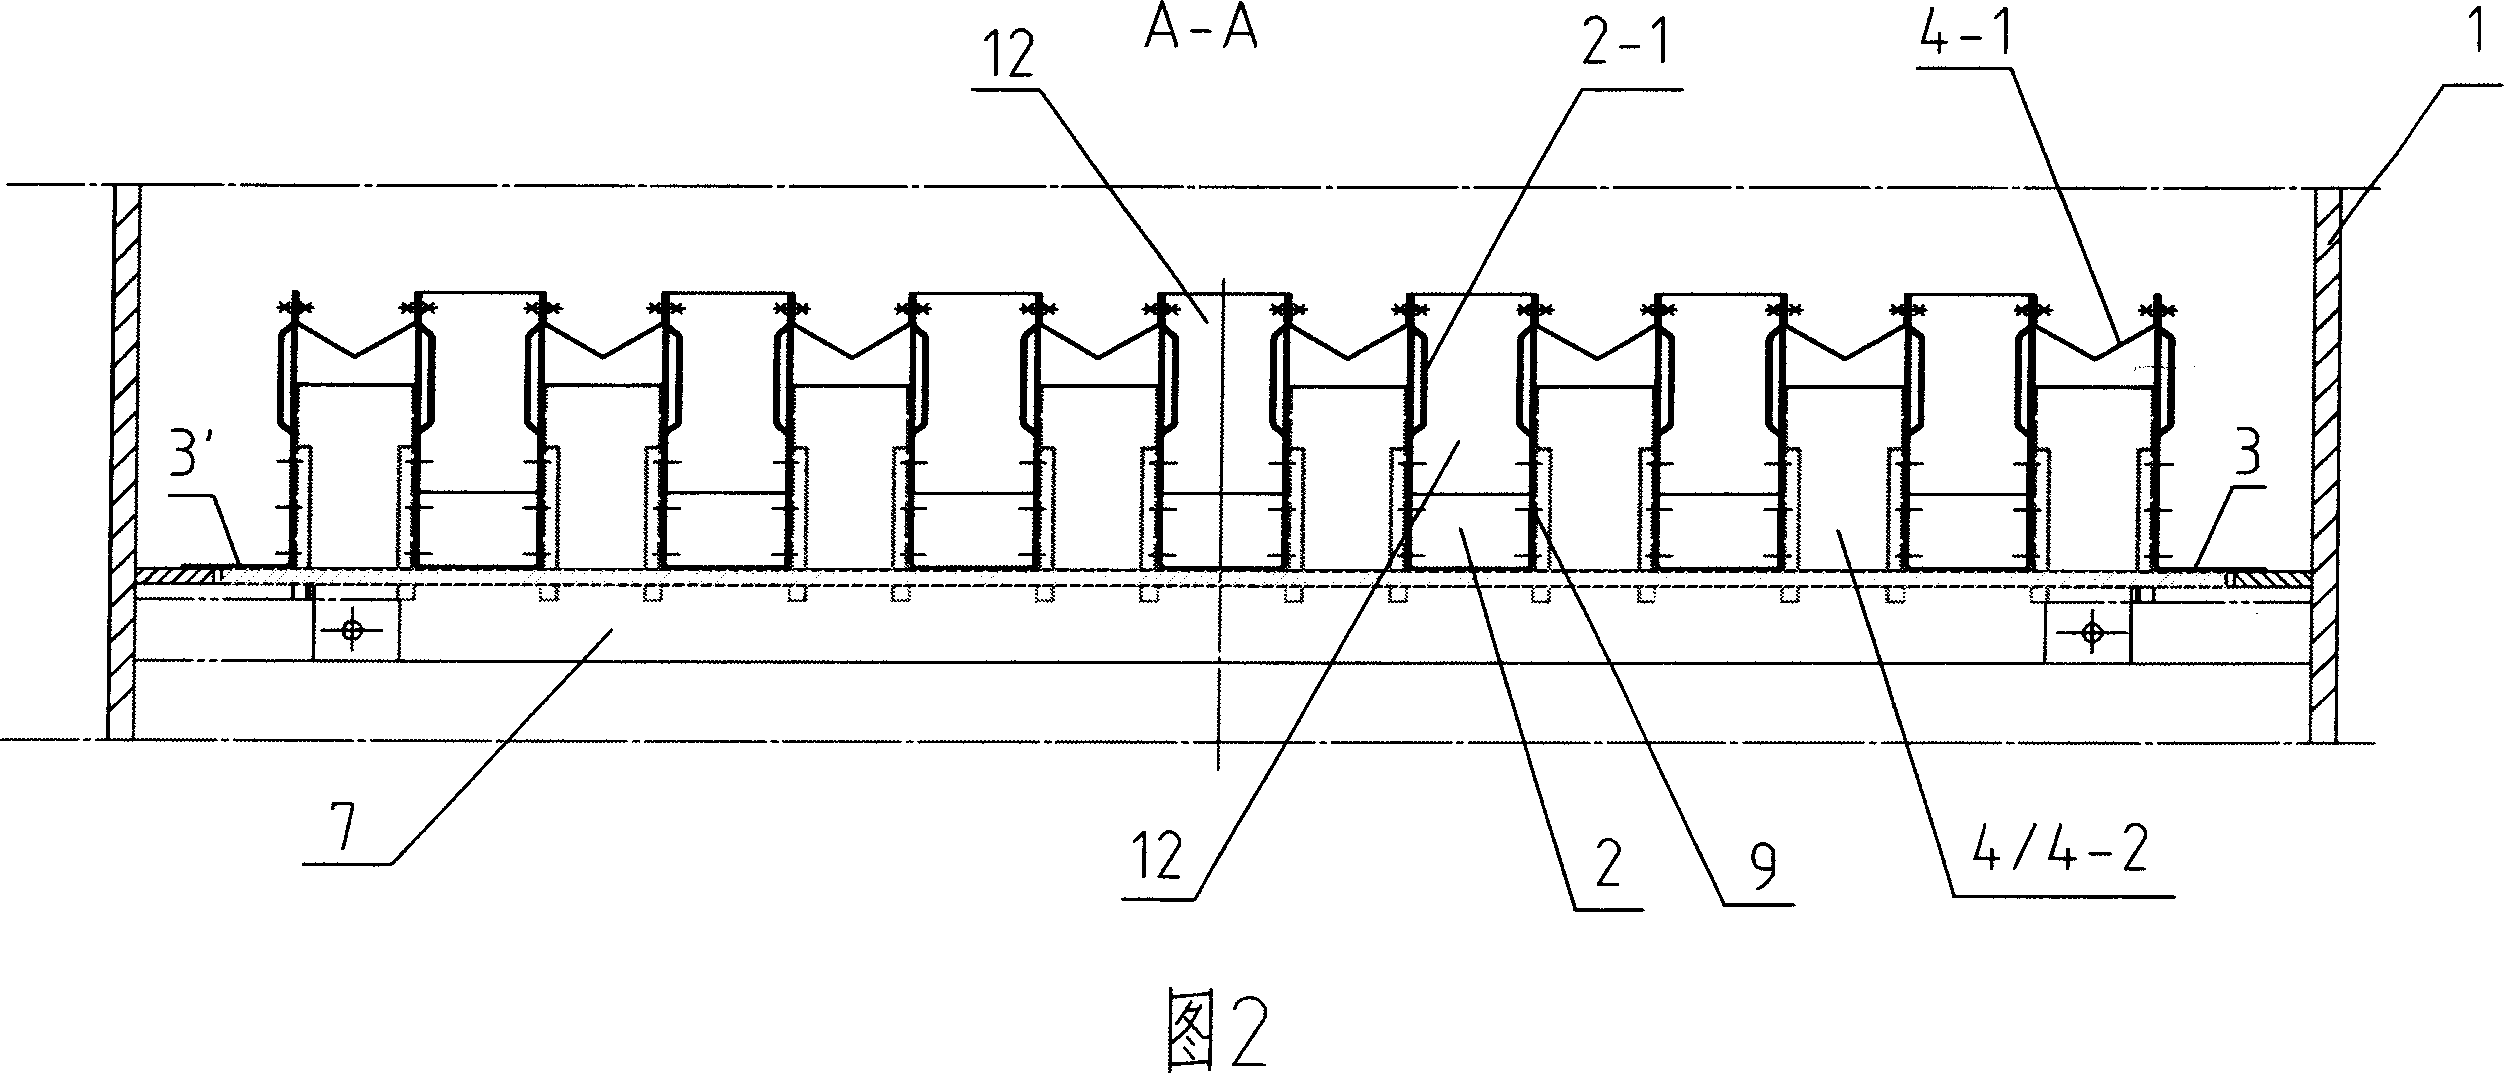 Gas-liquid allotter with supporting and mass transfer function